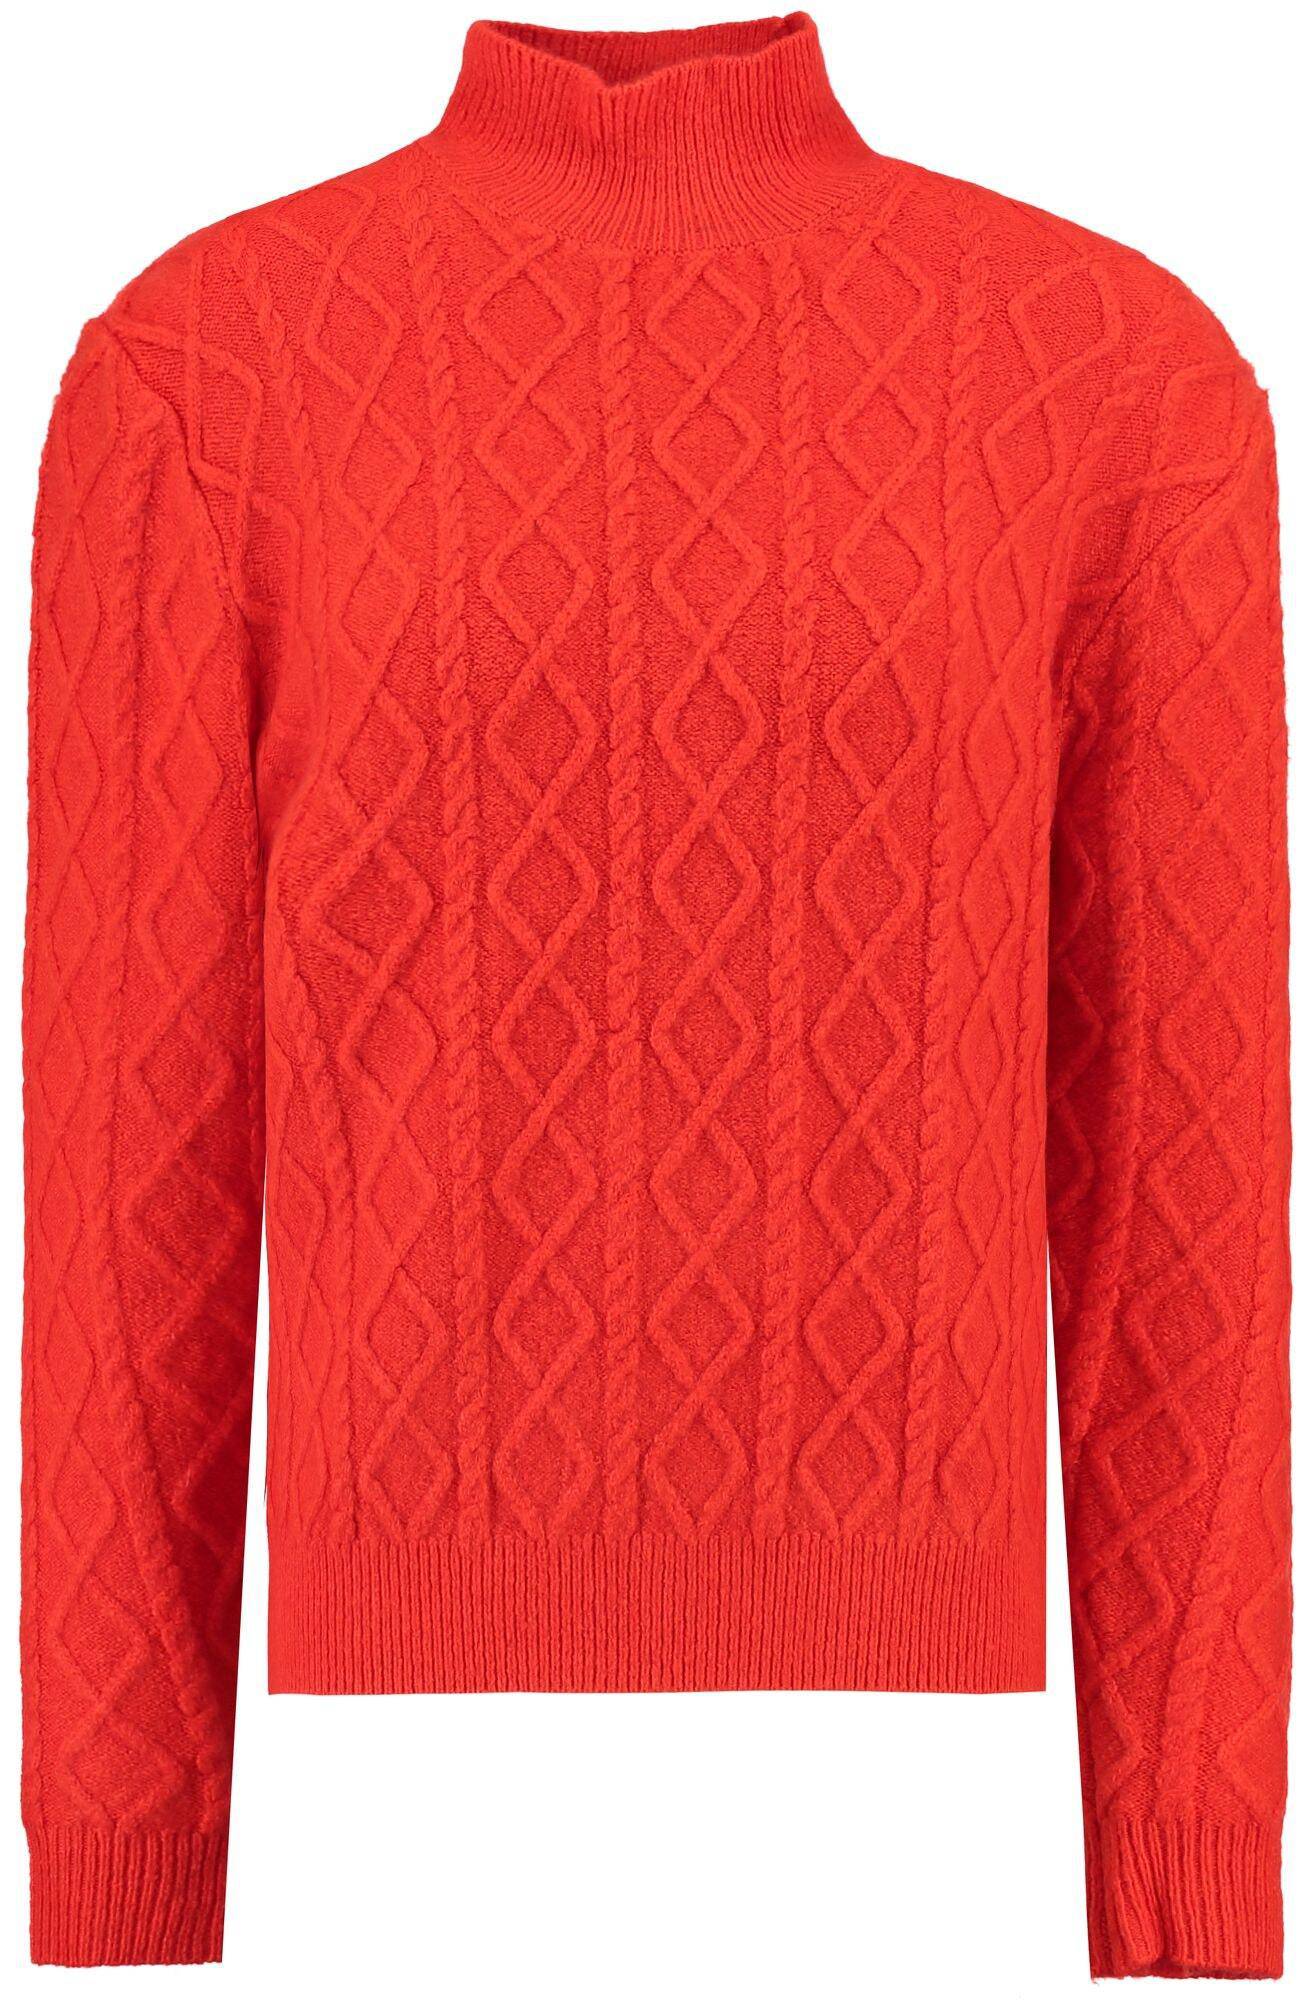 Red Orange High Collar Garcia Sweater - Your Style Your Story